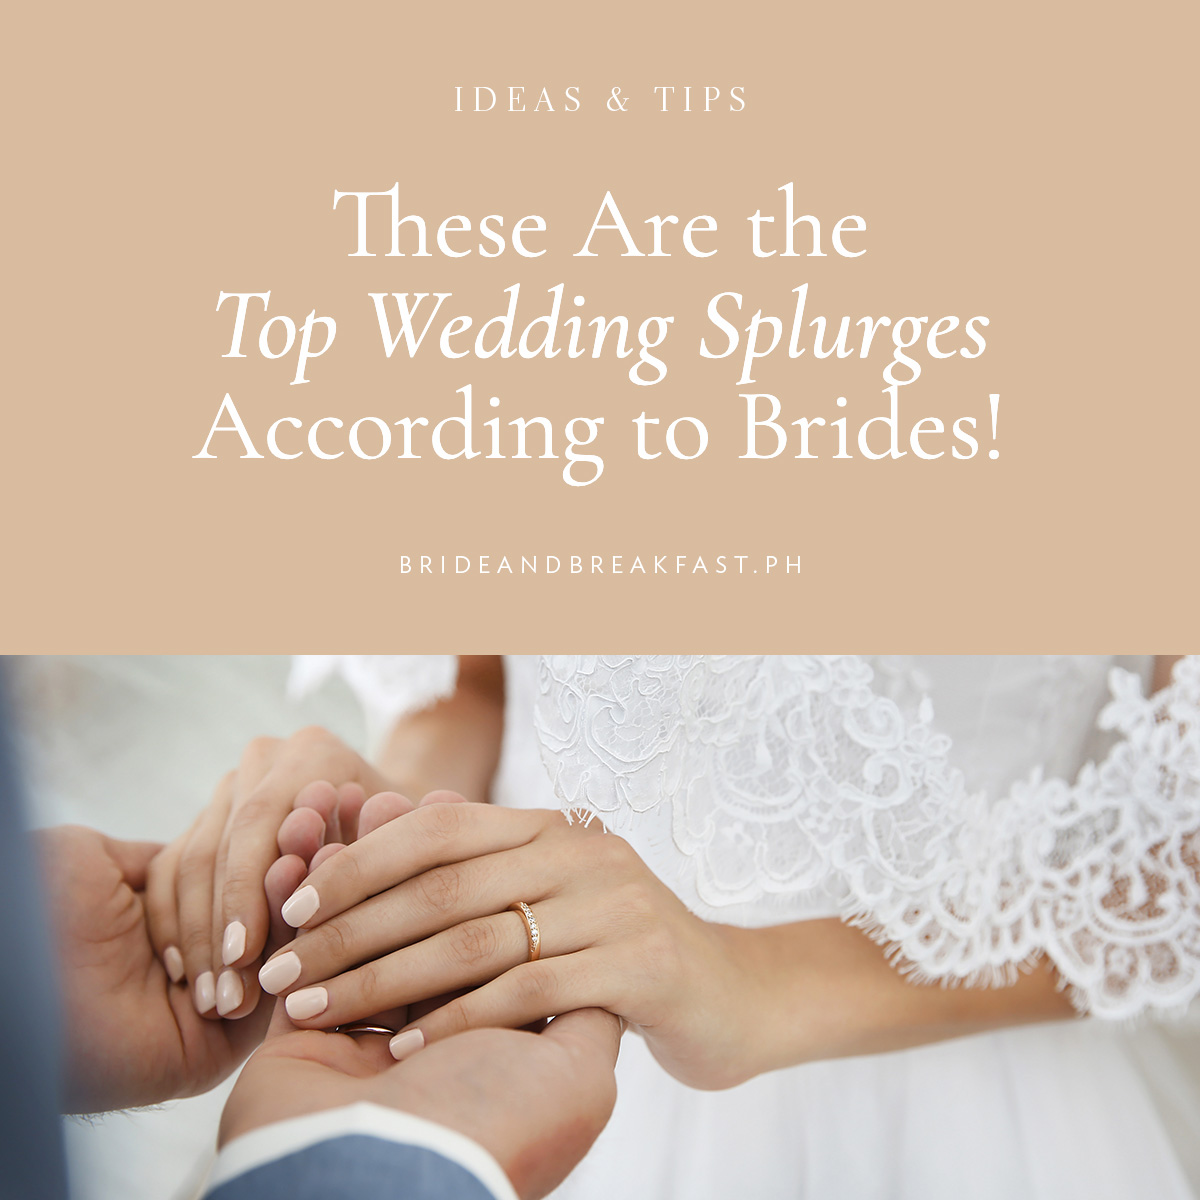 These Are the Top Wedding Splurges According to Brides!